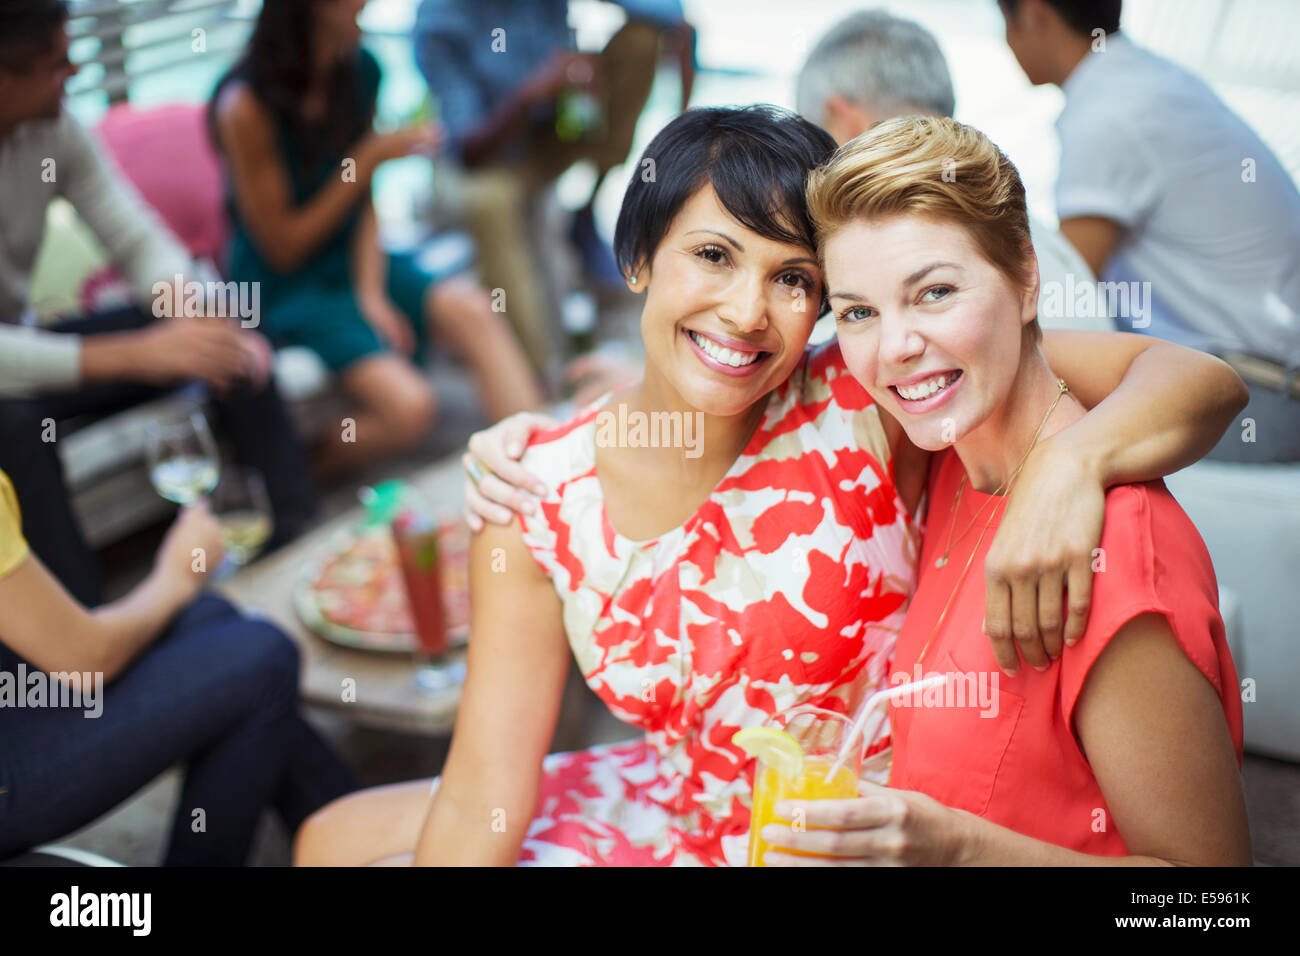 Women hugging at party Banque D'Images